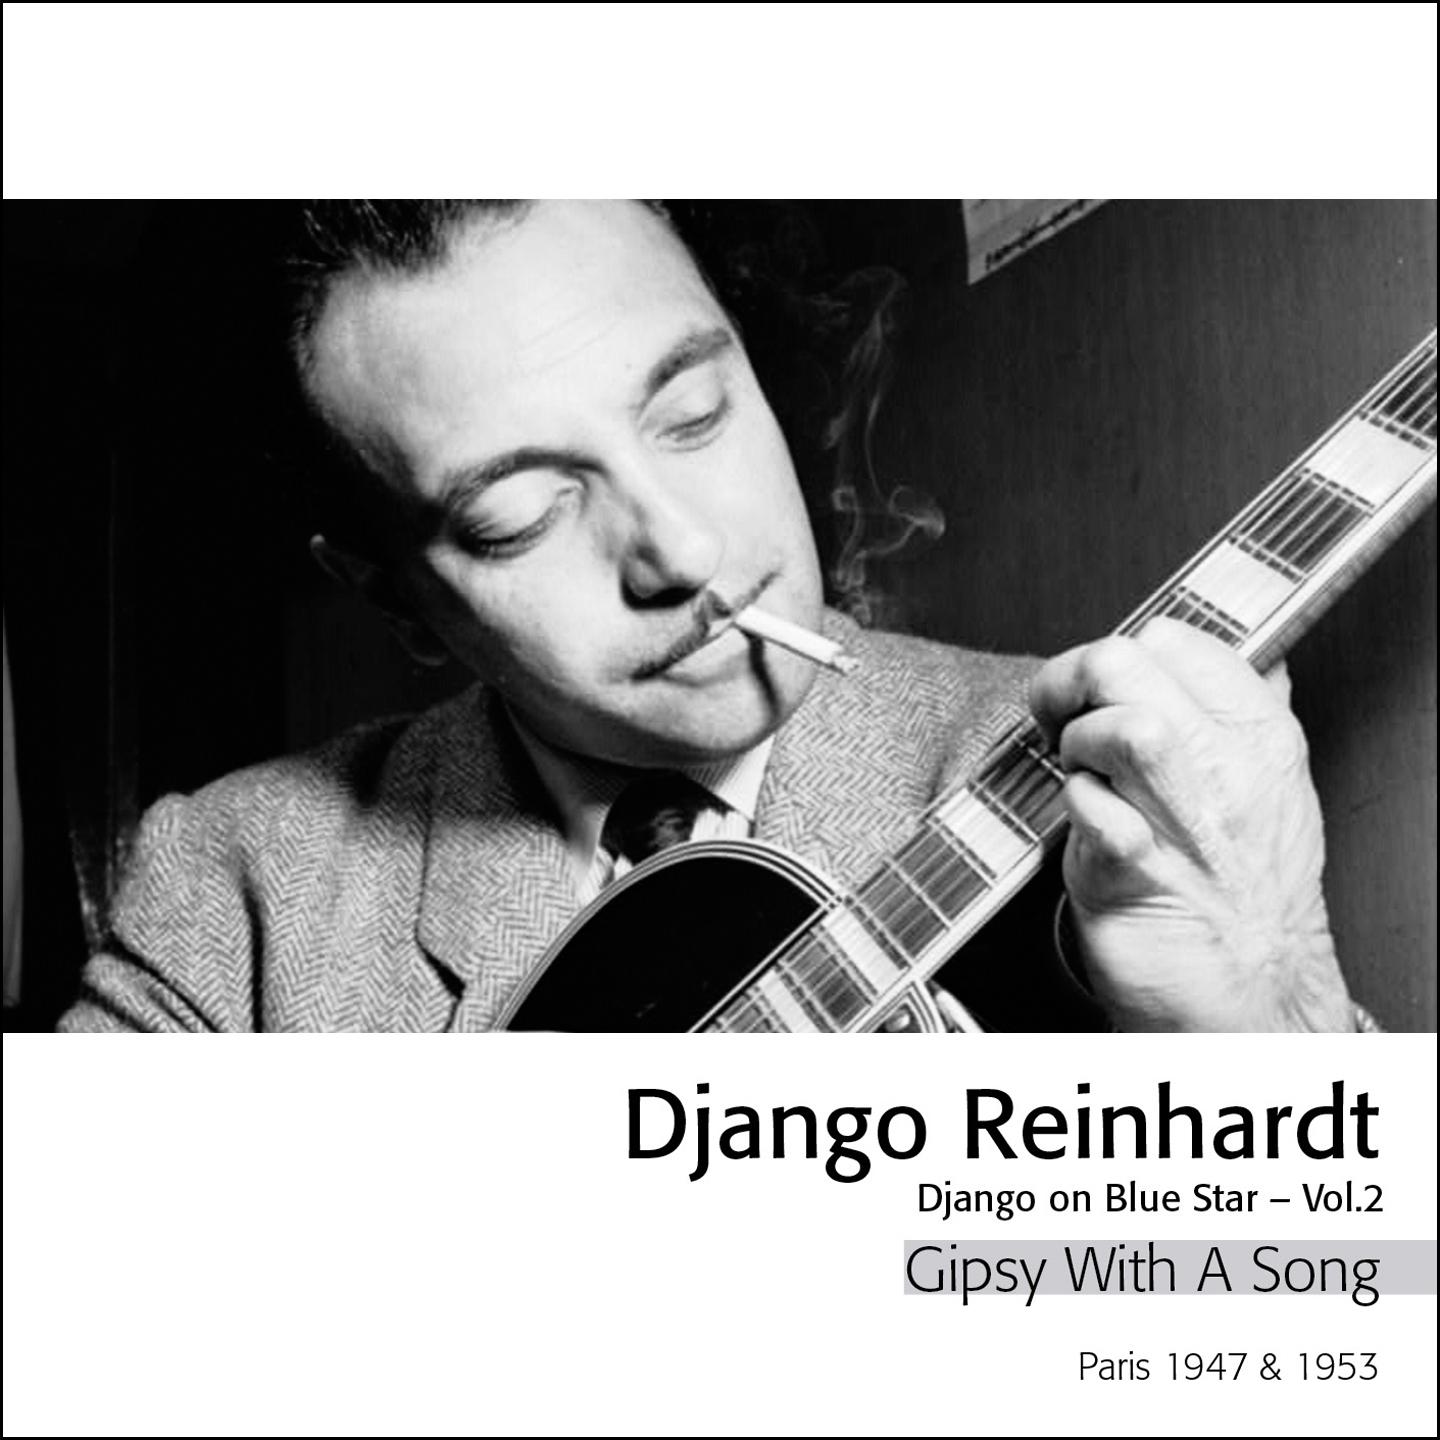 Django On Blue Star, Vol. 2 (Gipsy With a Song)